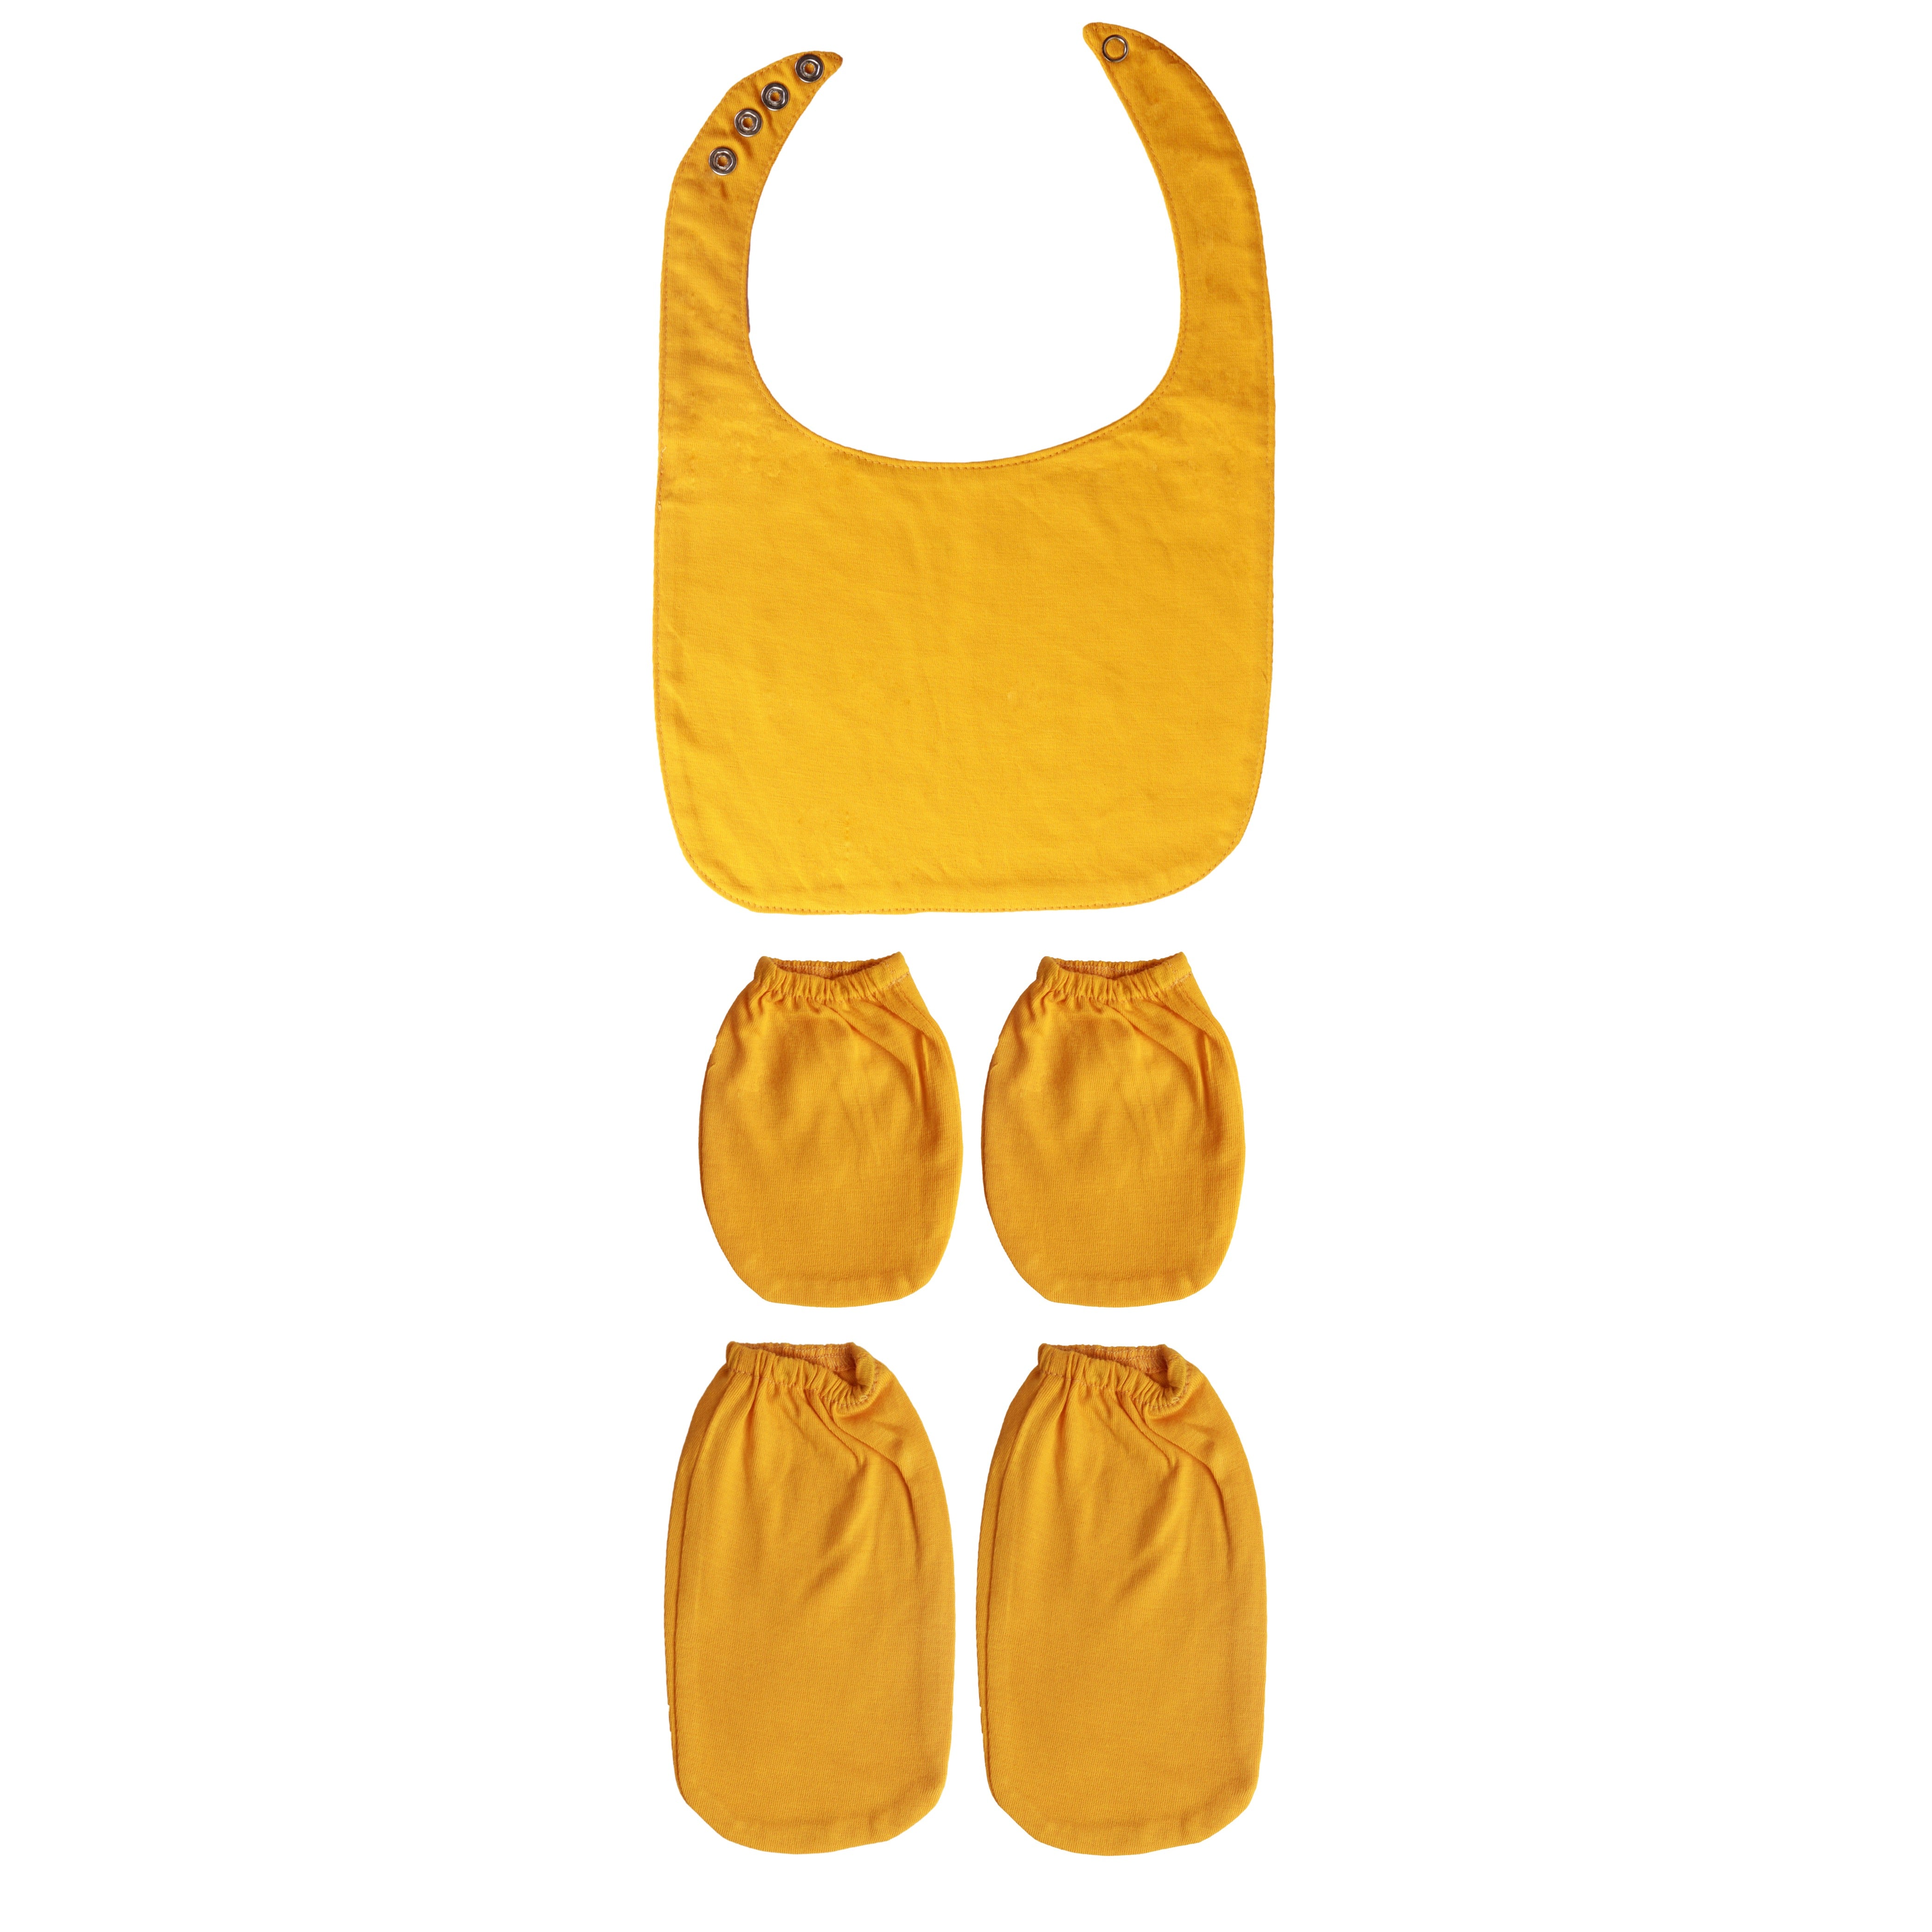 Little By Little 100% Anti Viral, Cotton, Reusable, Anti bacterial & Water Repellent Baby Set of Romper, Swaddle, Bib, Booties, Mittens - Yellow